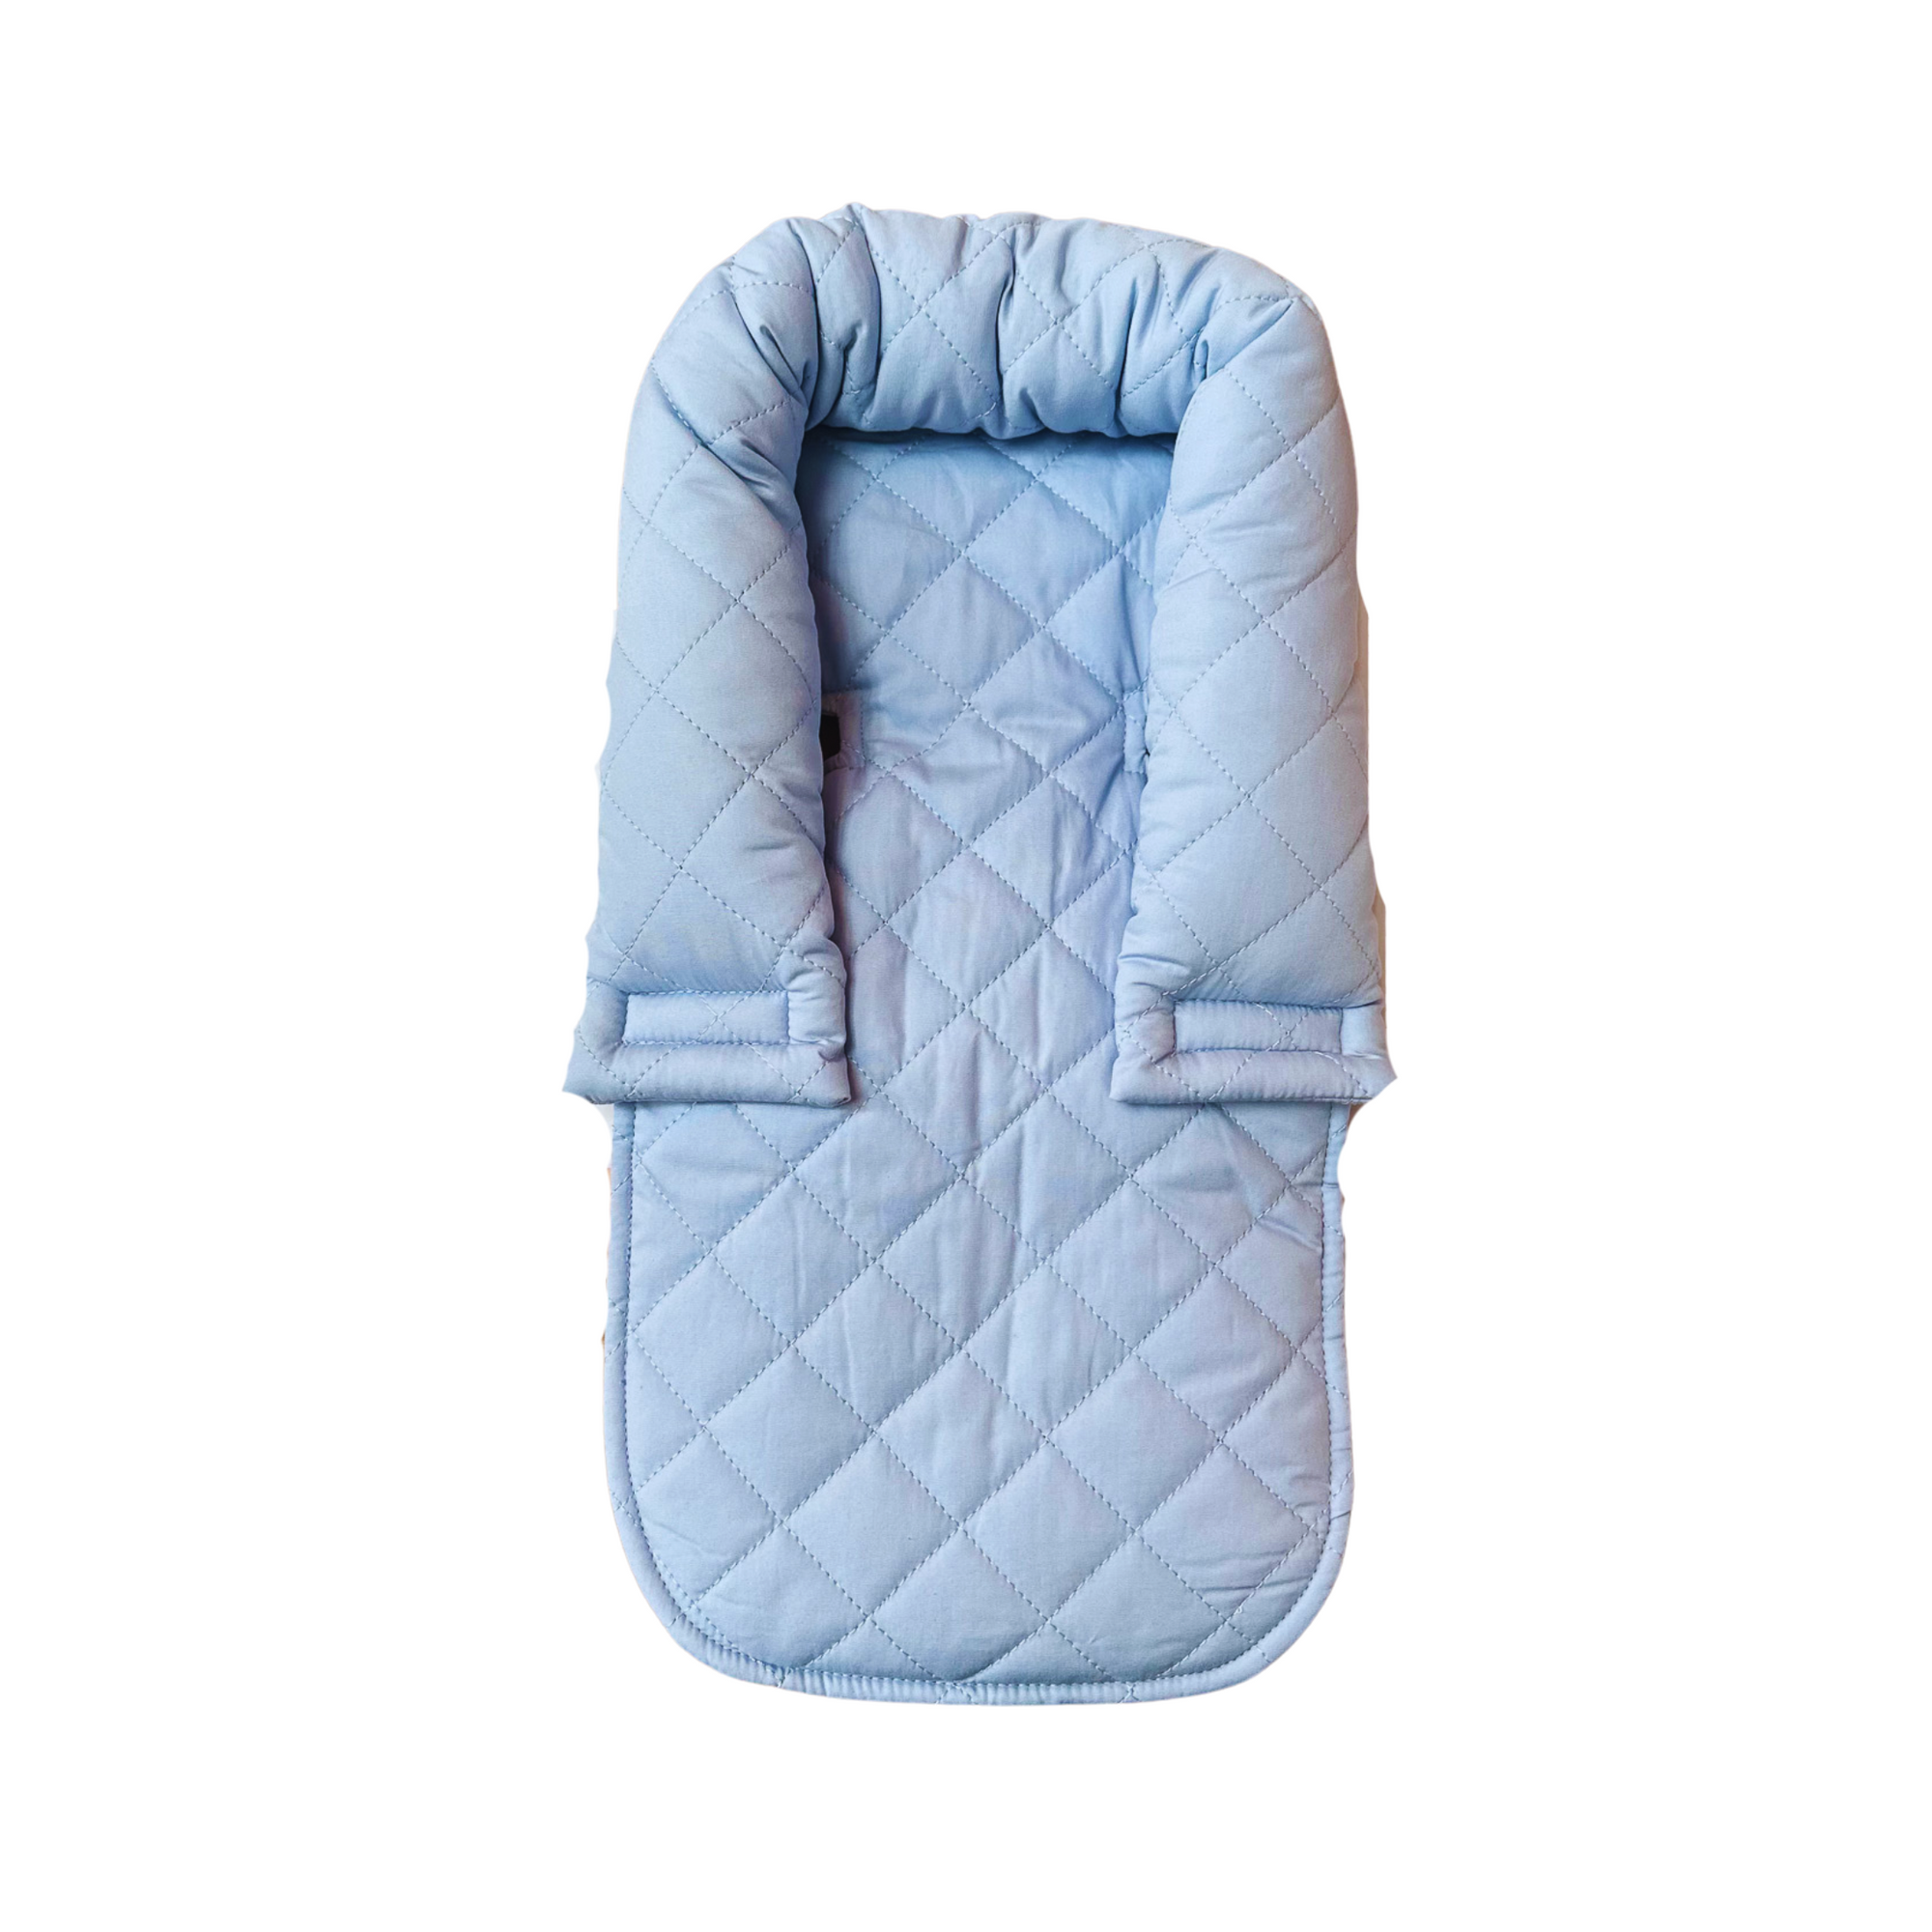 Infant Head Support Quilted | Dusty Sky Blue